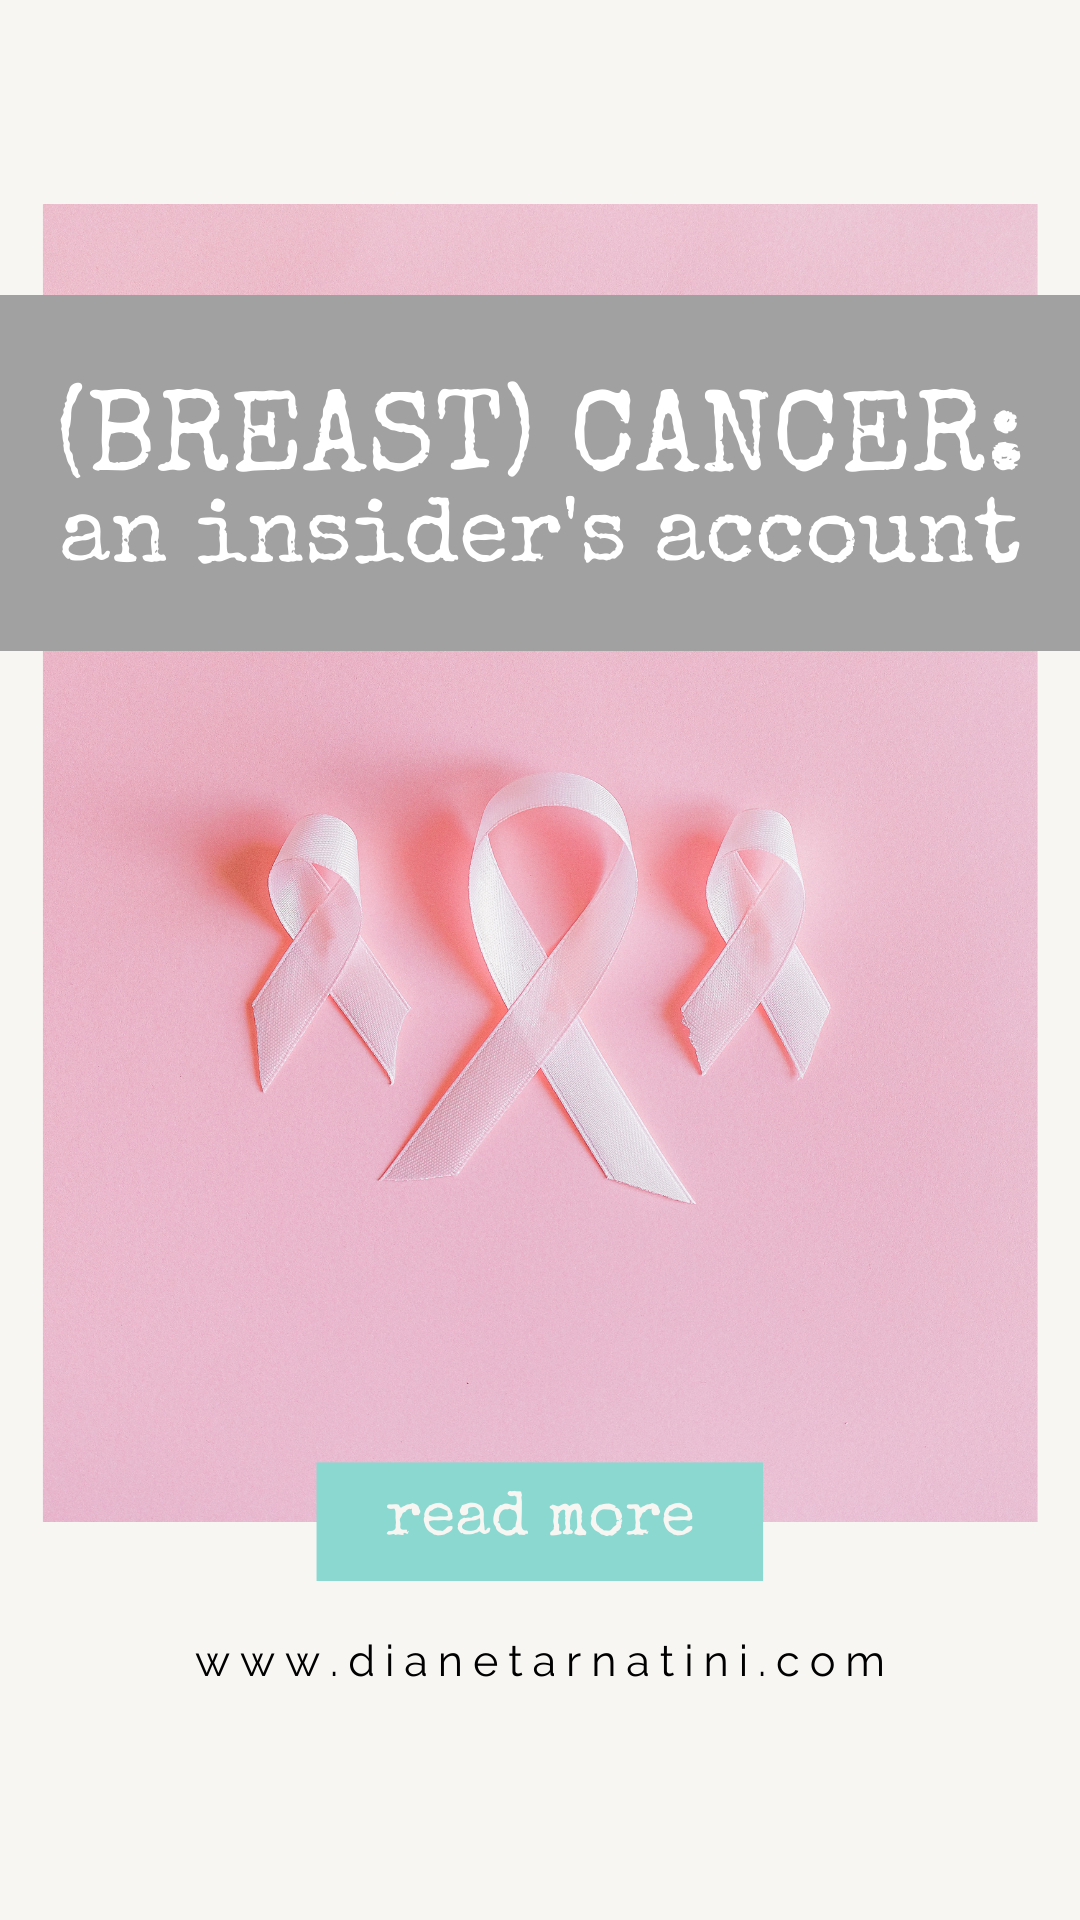 Breast Cancer from an insider